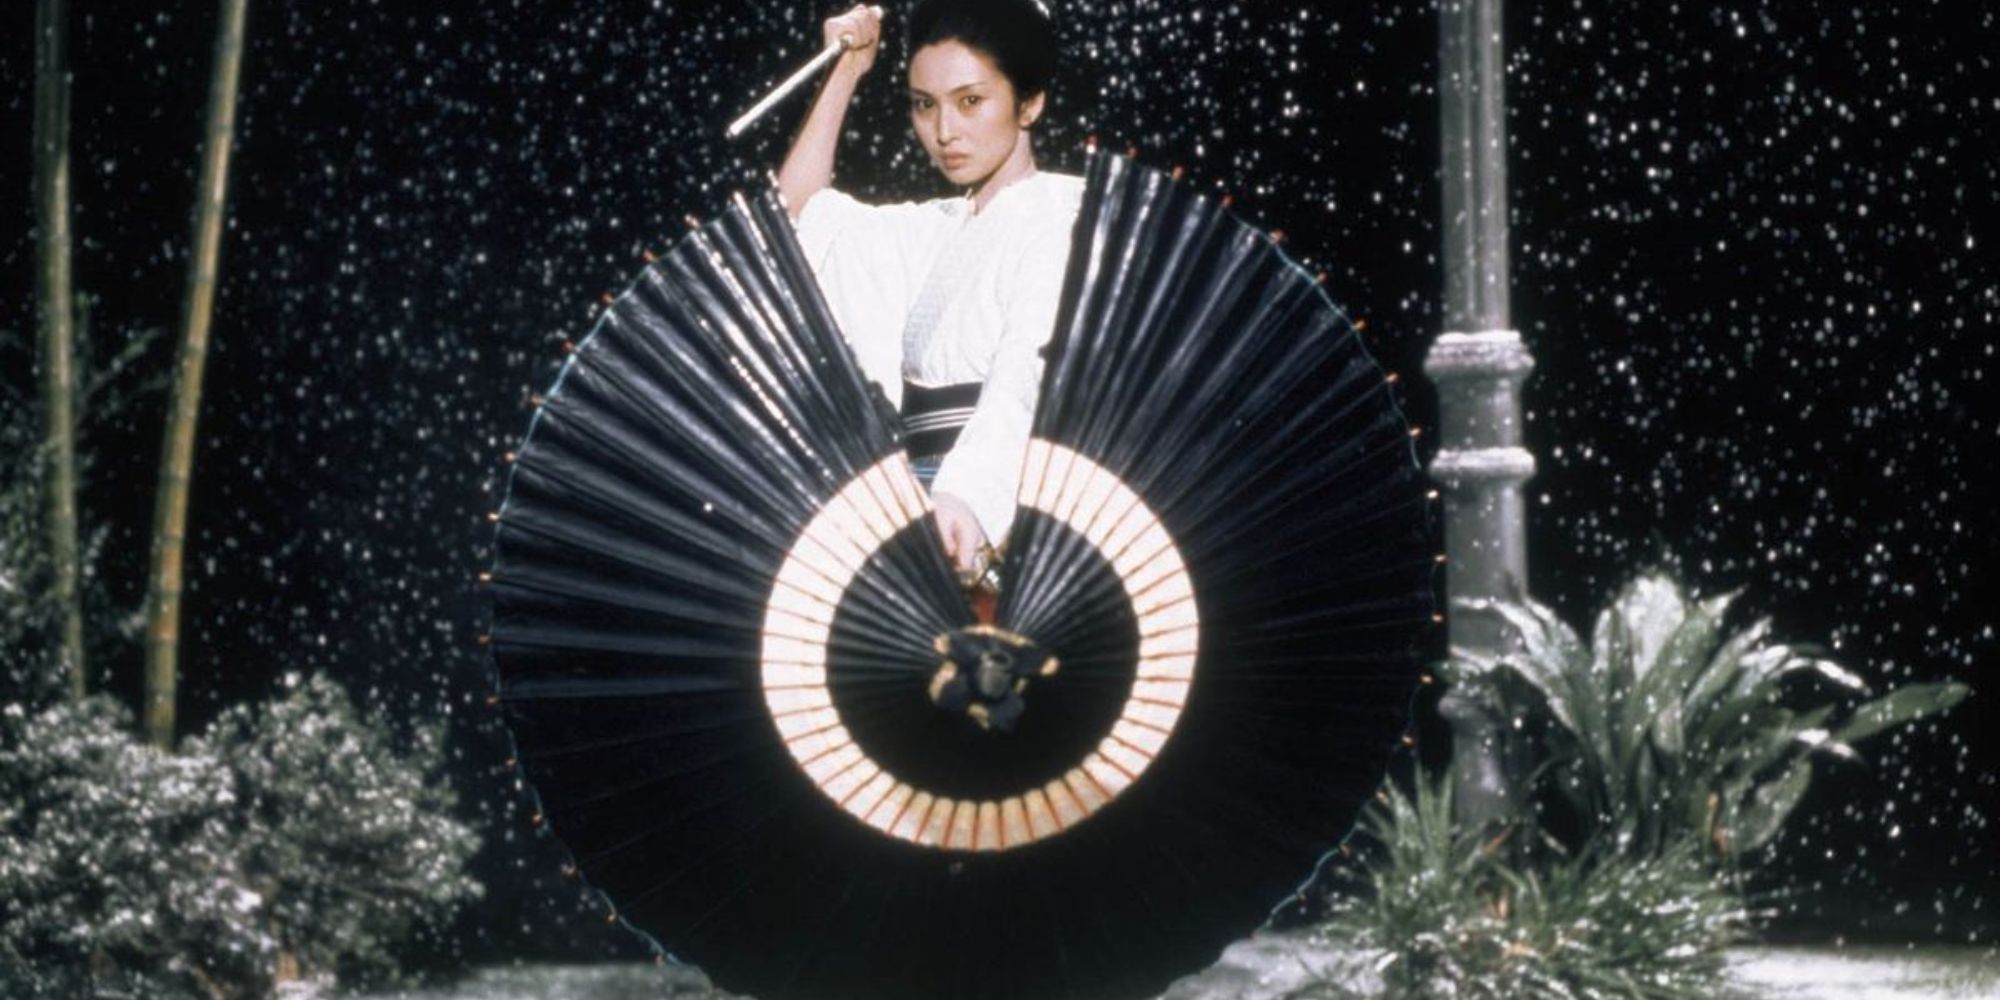 Lady Snowblood poses with a dagger and a parasol